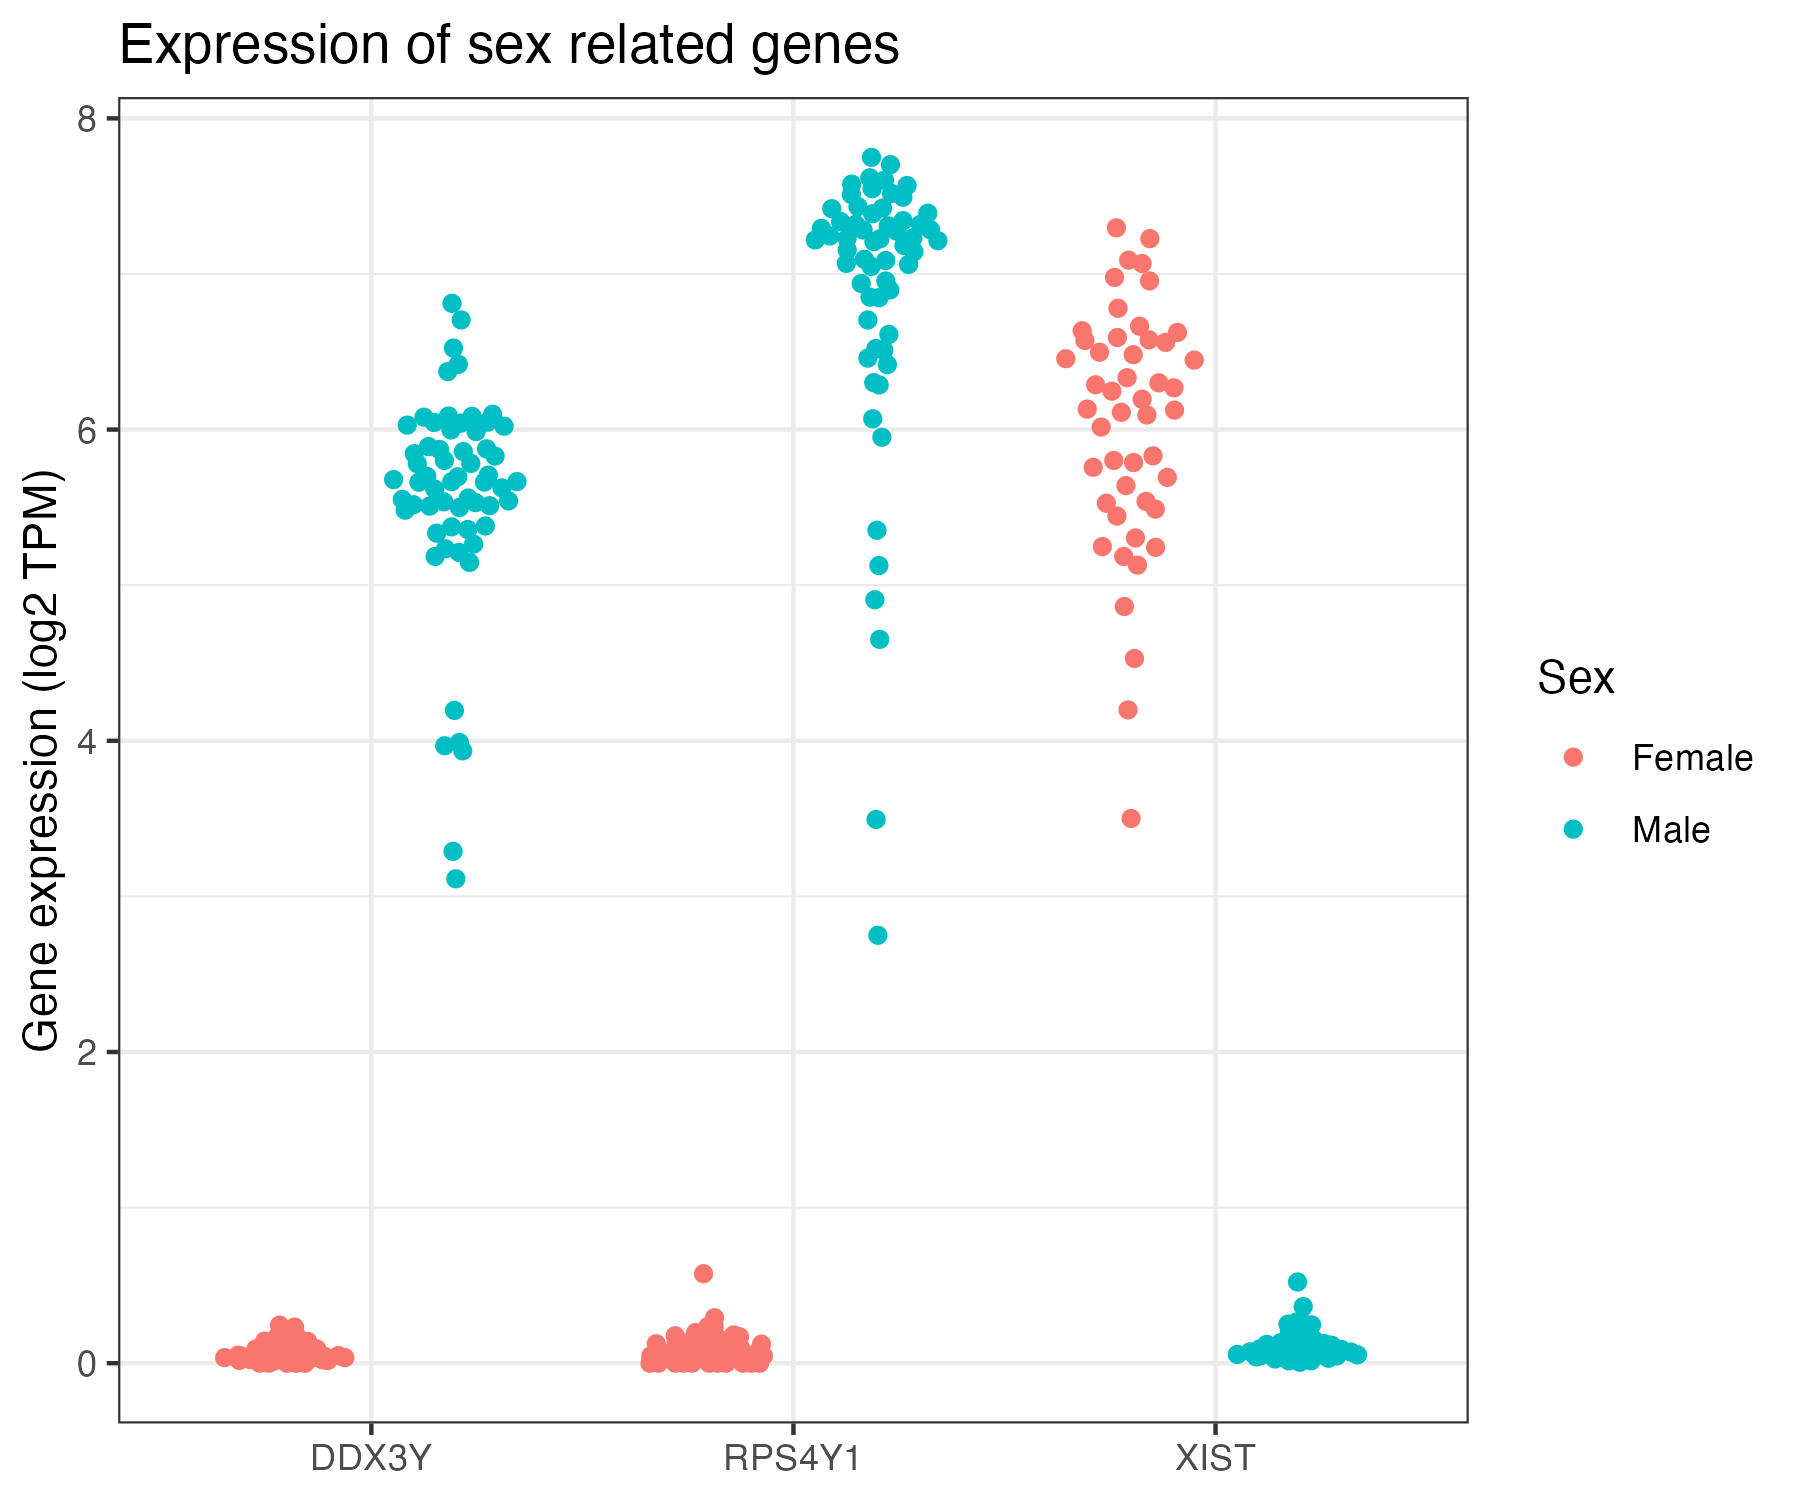 Dot plot of the sex related gene expression grouped by the sex status obtained from the clinical data